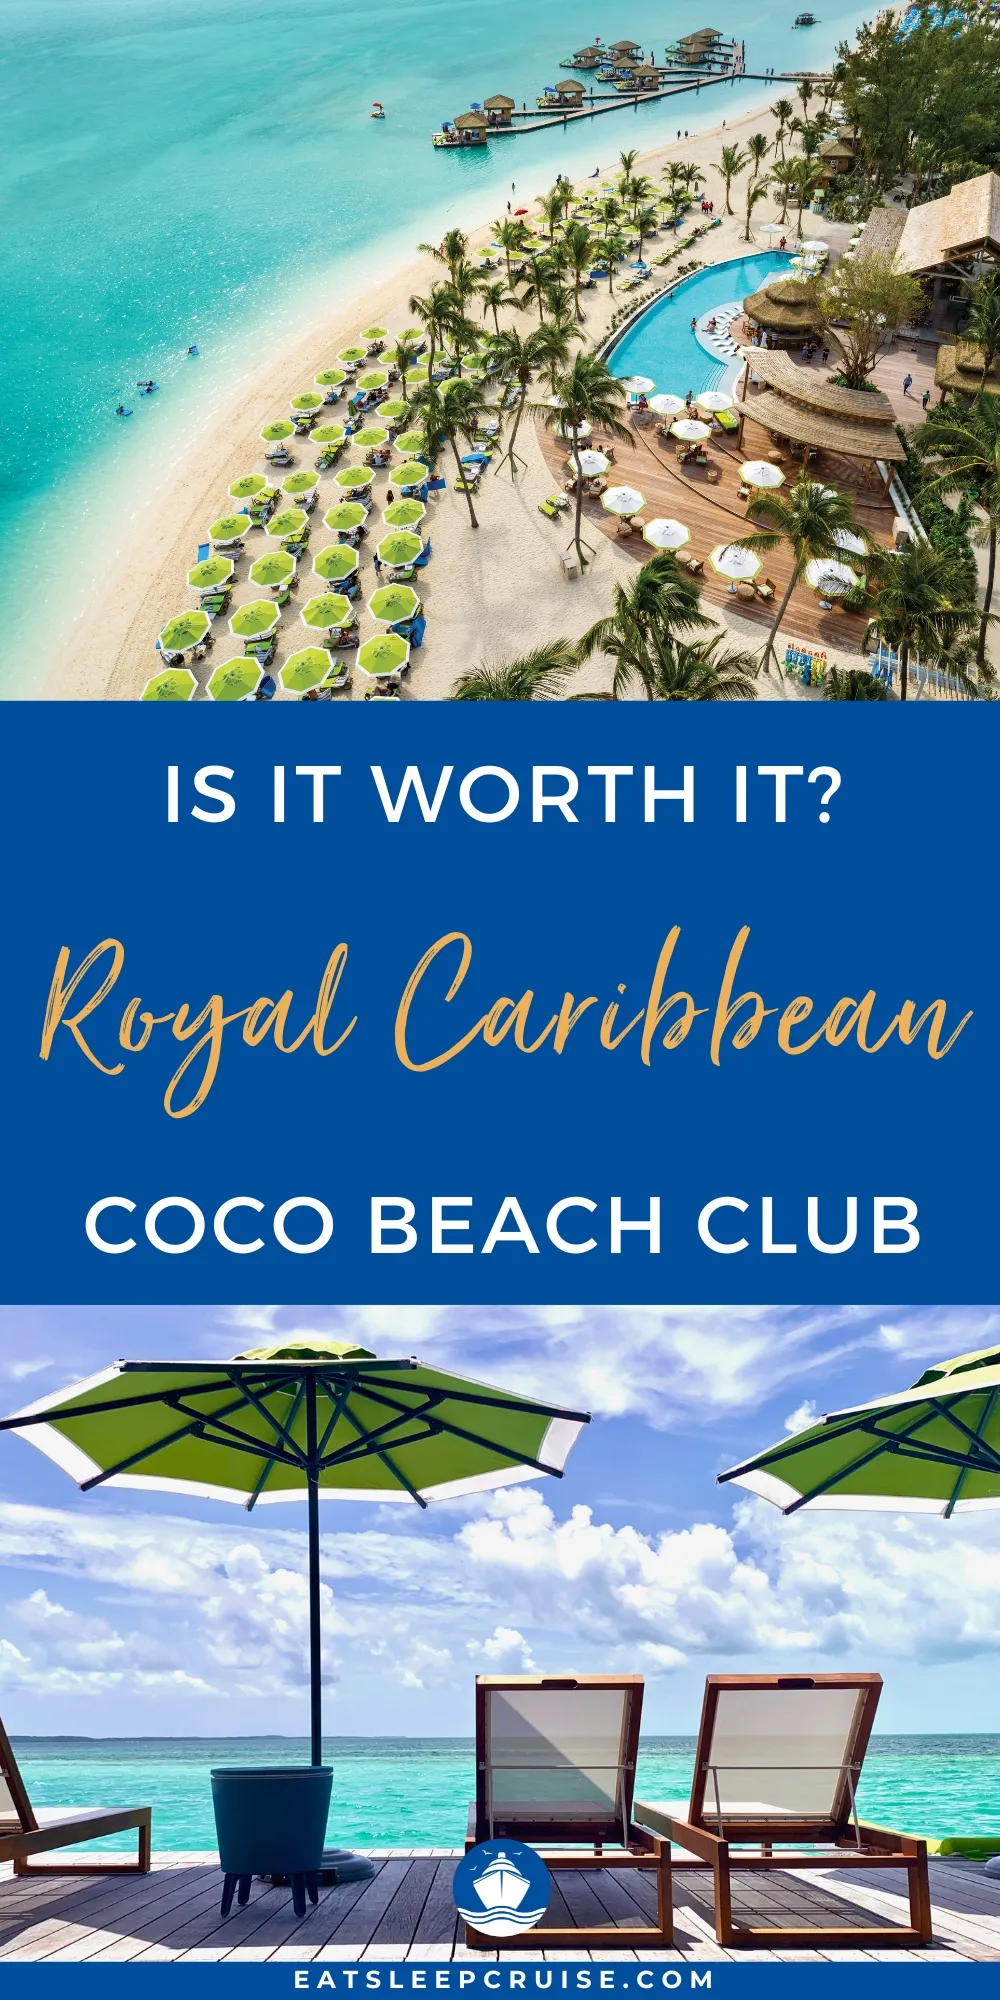 Coco Beach Club on Royal Caribbean's Perfect Day at CocoCay - Is it worth it?